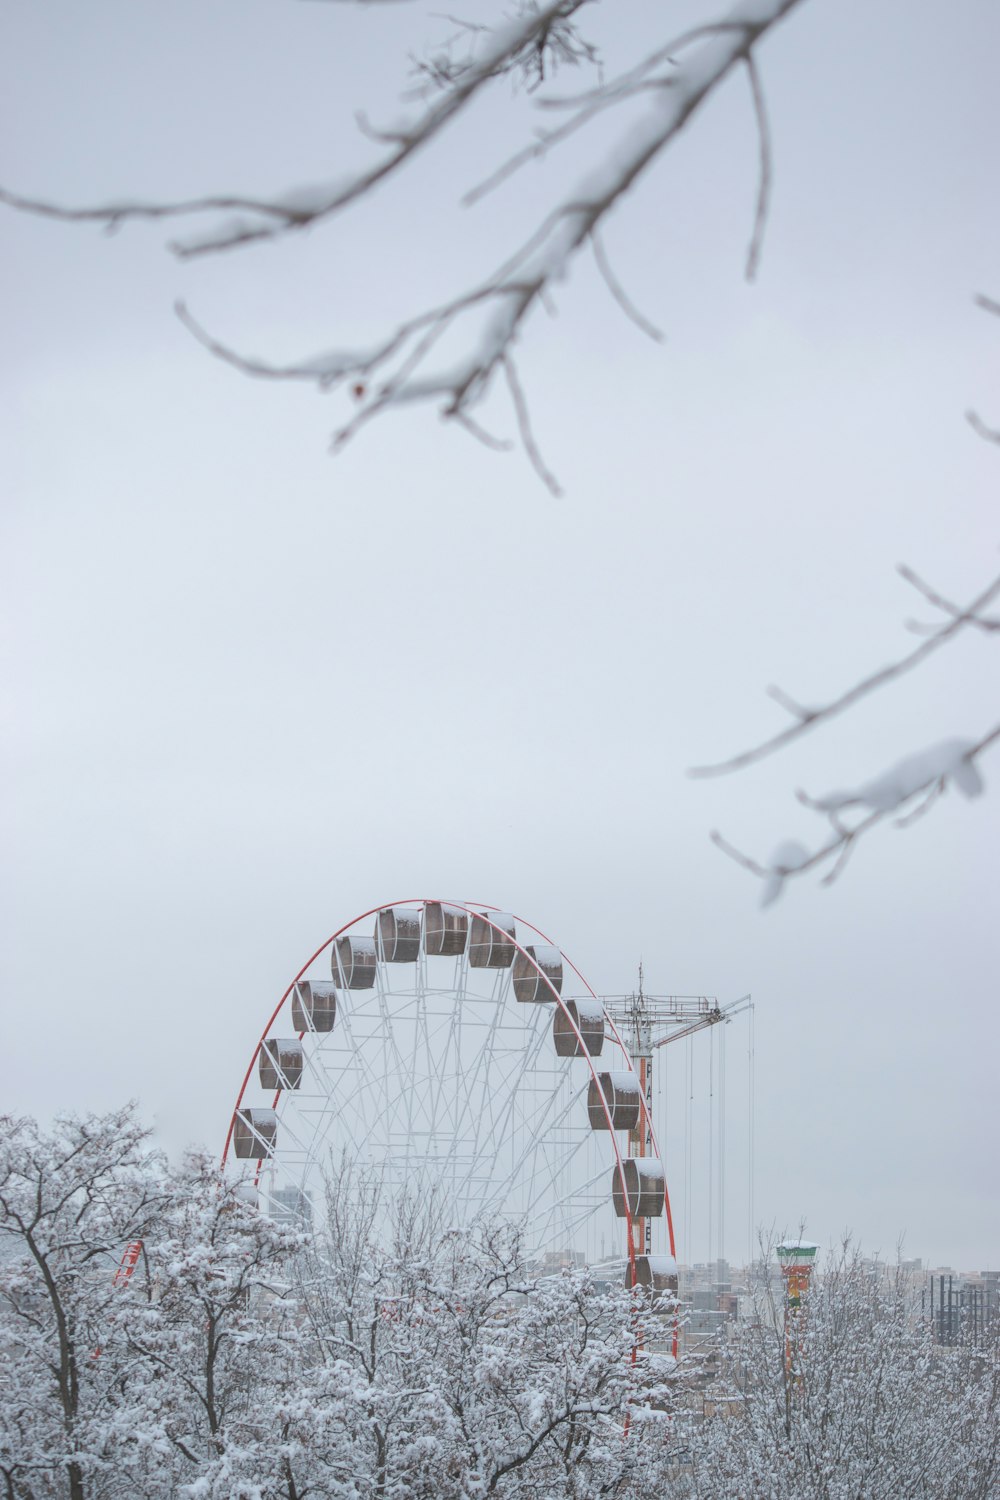 a ferris wheel in the middle of a snowy park